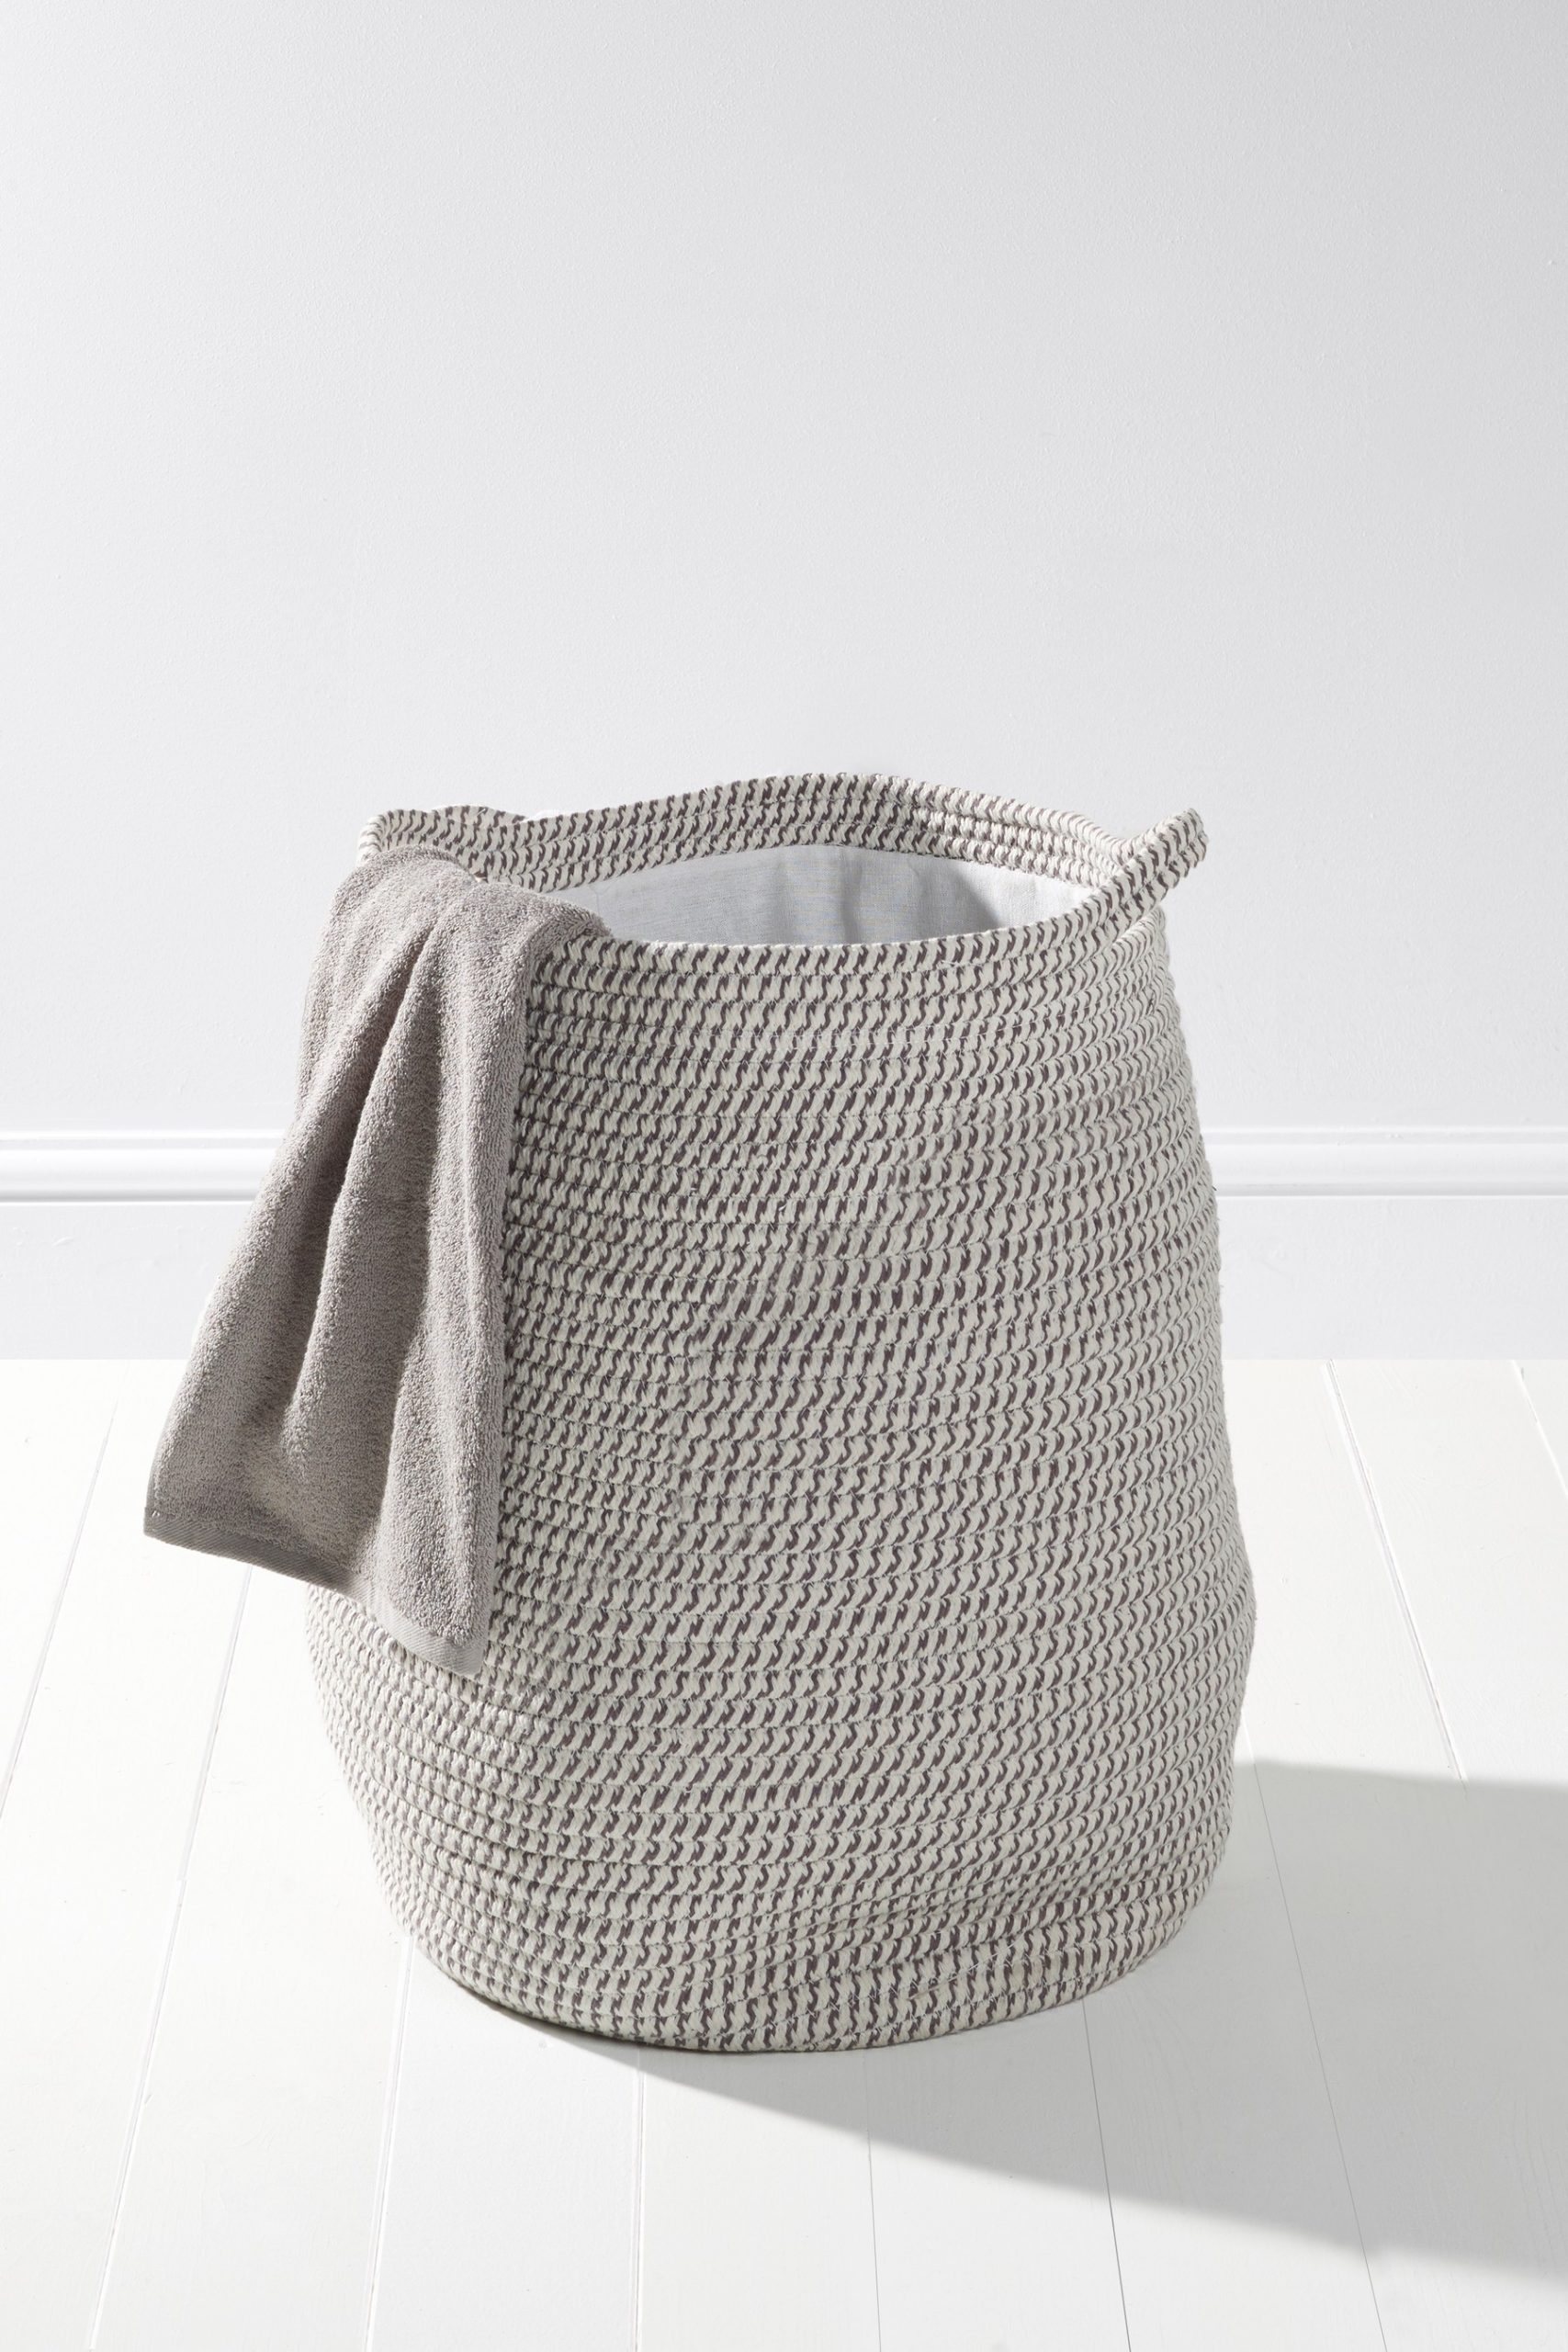 Buy Woven Laundry Bin from the Next UK online shop